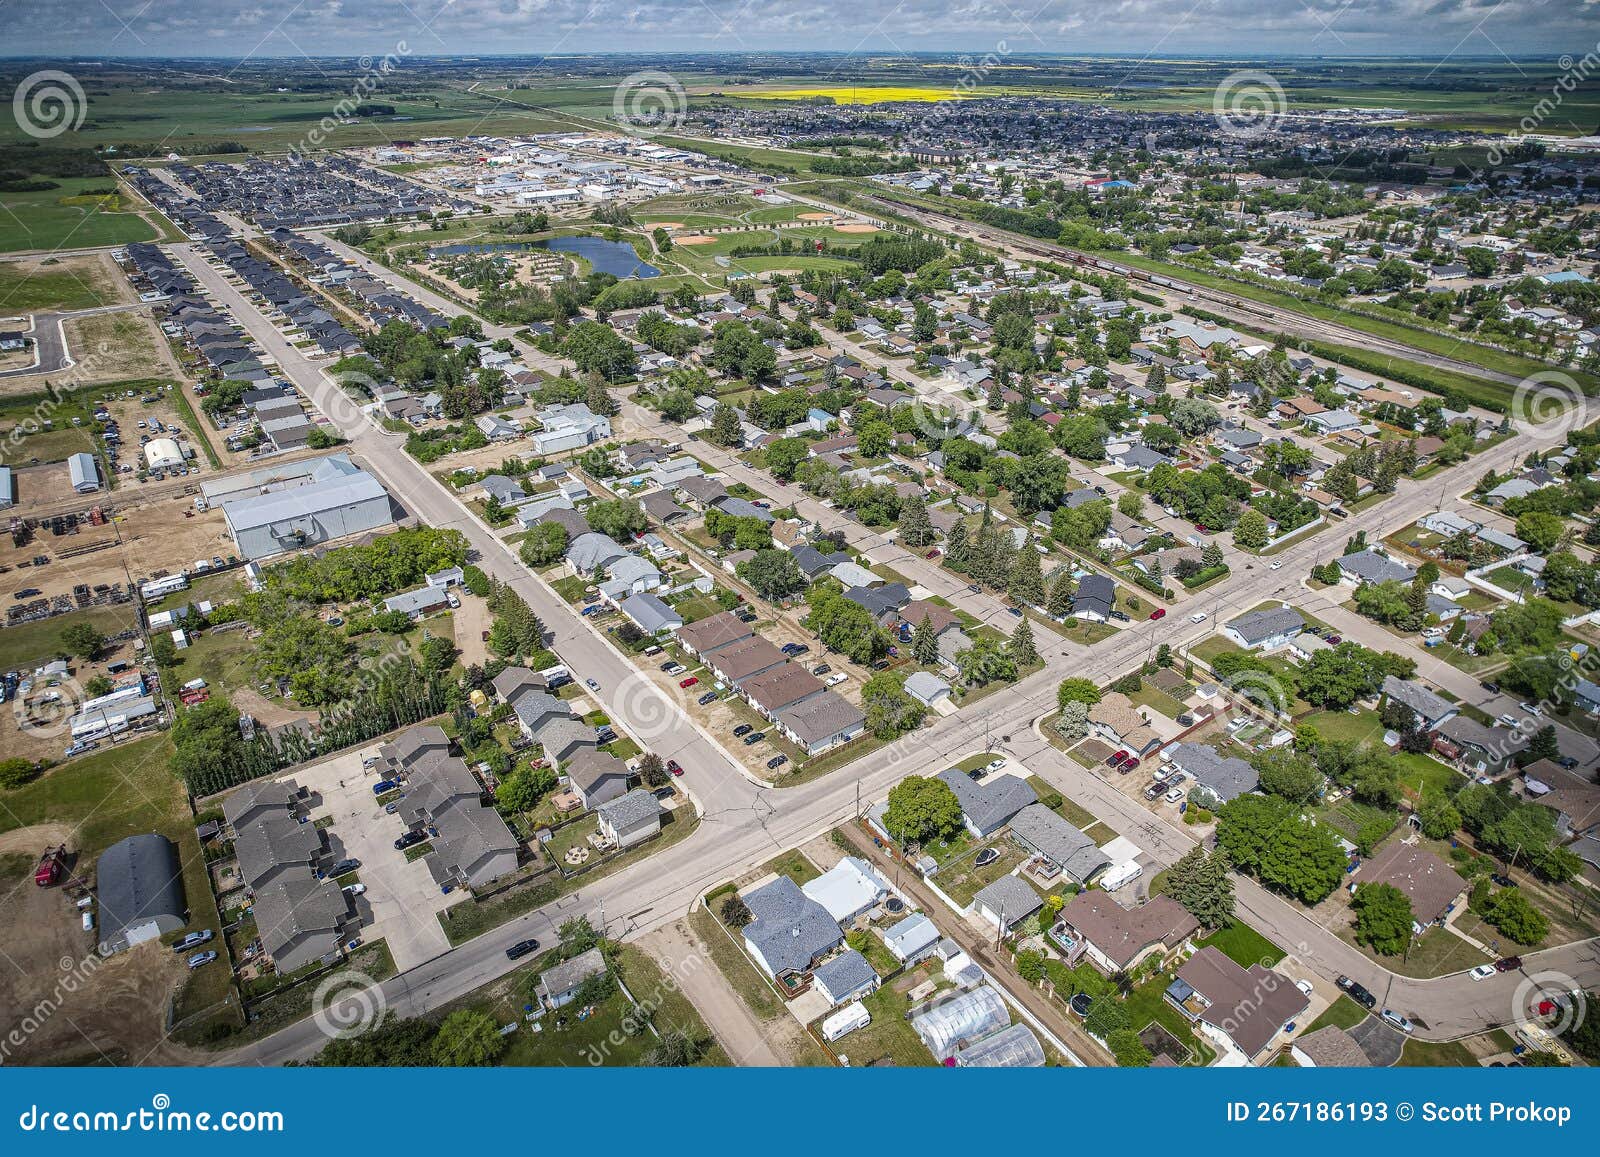 Aerial View of Warman in Central Saskatchewan, Canada Stock Image ...